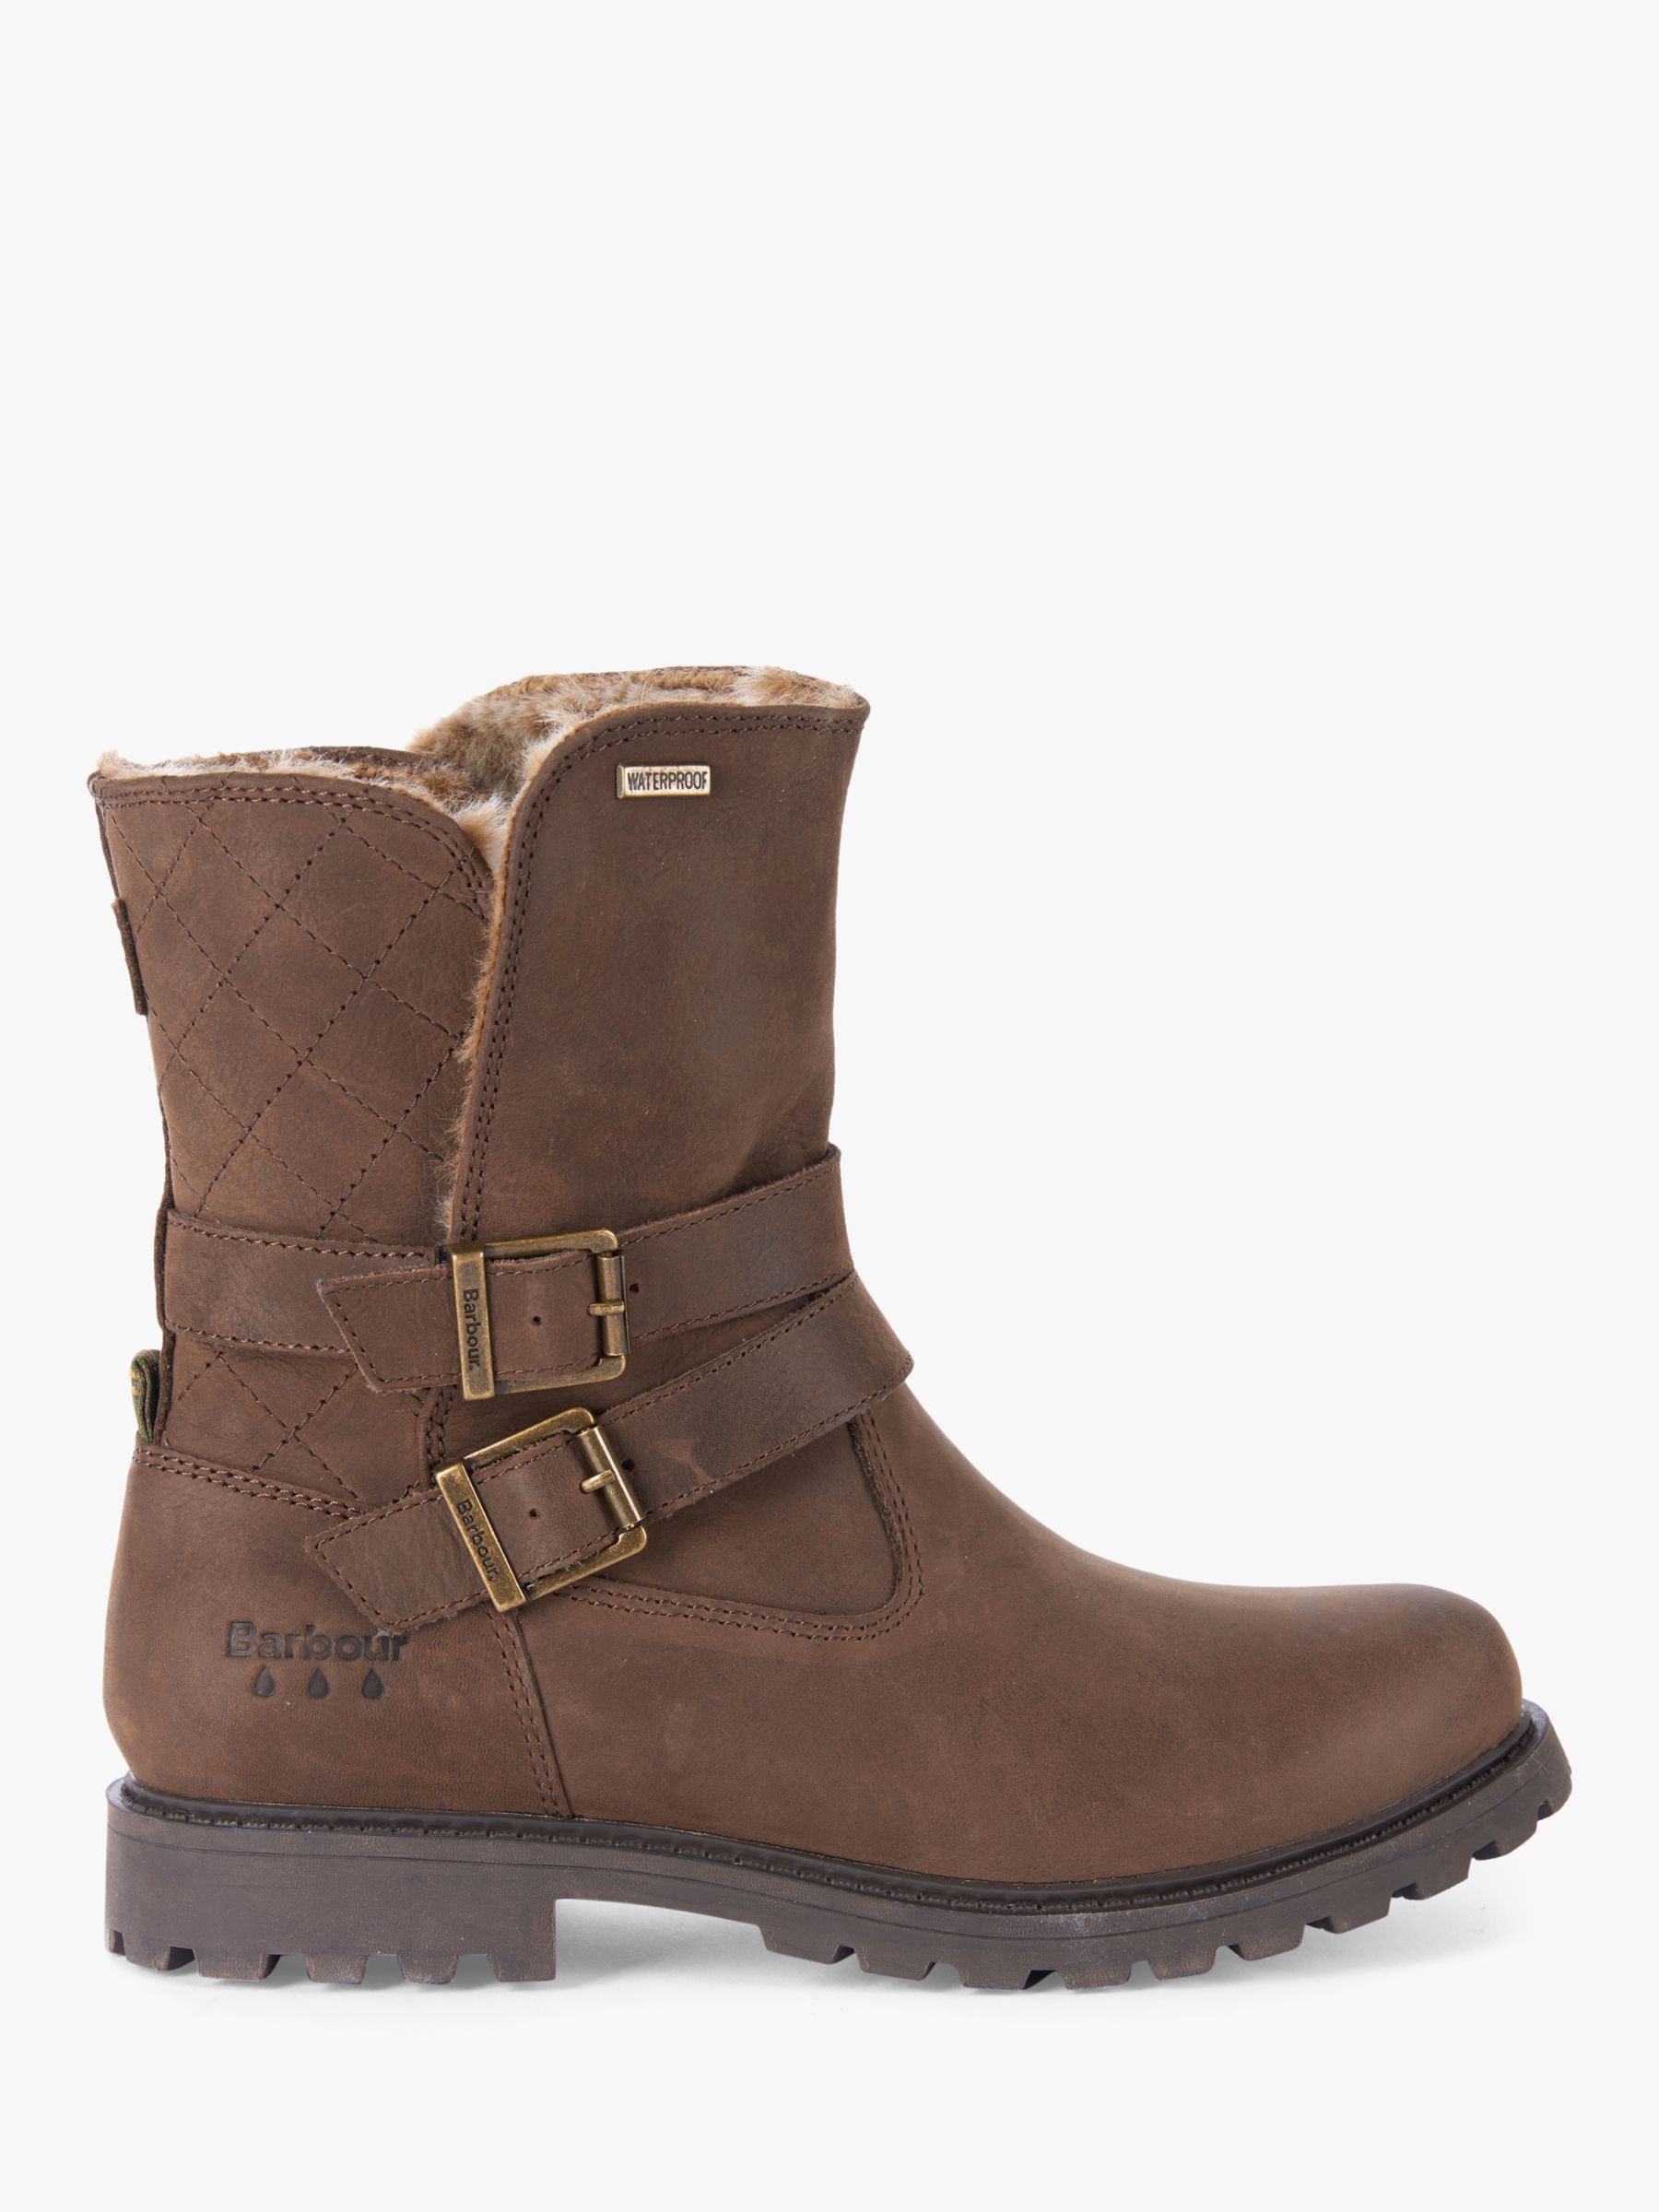 Barbour Sycamore Leather Mid Length Boots, Brown at John Lewis & Partners